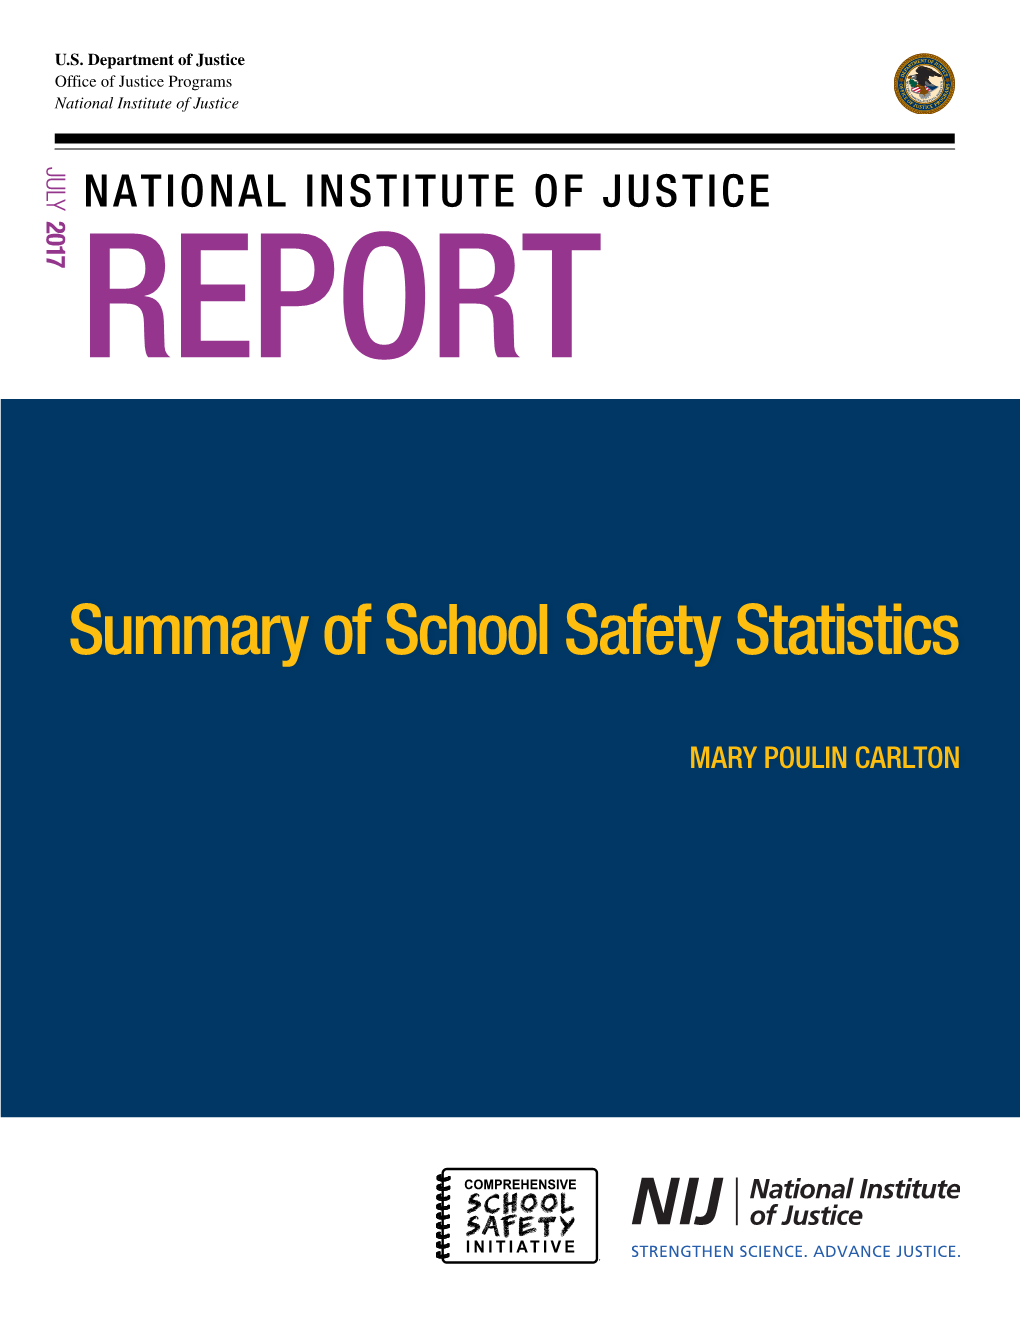 National Institute of Justice Report: Summary of School Safety Statistics